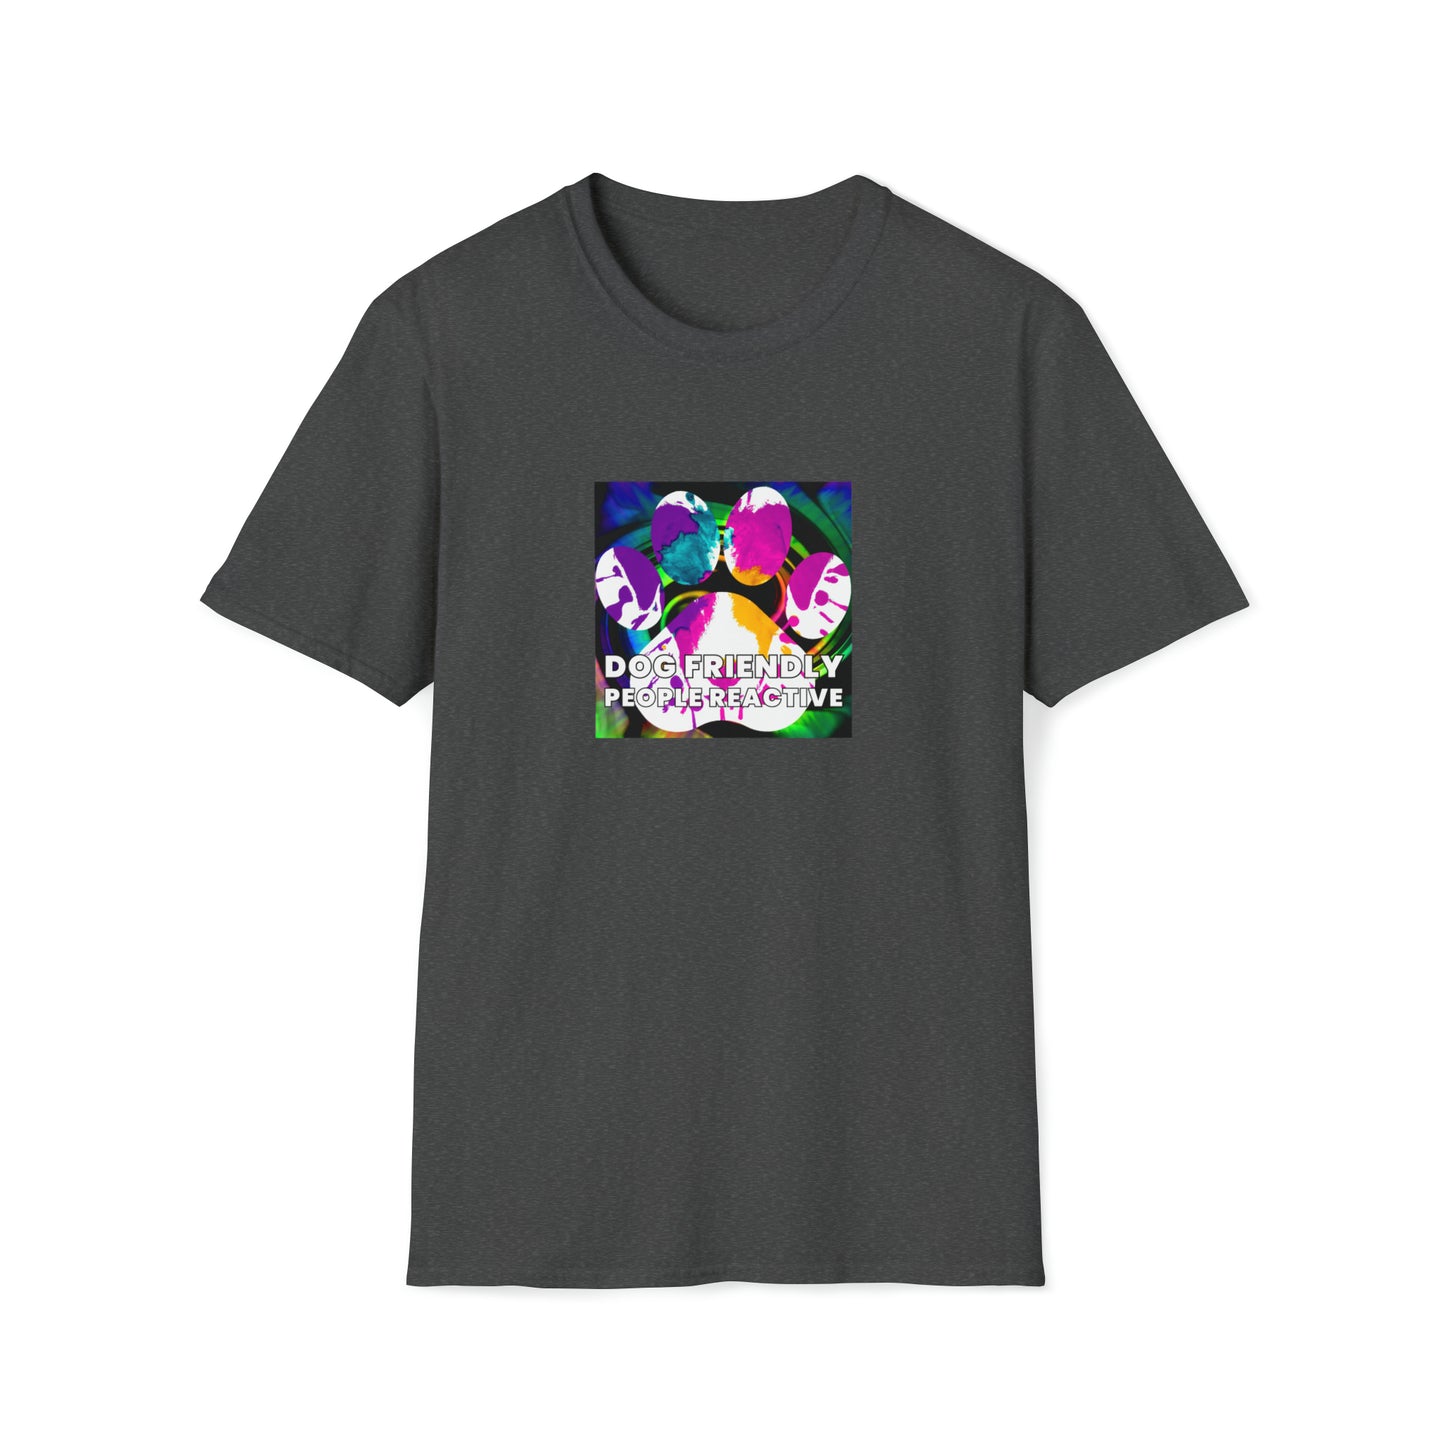 TruFashionsByTay - "Dog Friendly, People Reactive" (colored swirl) Unisex Tee